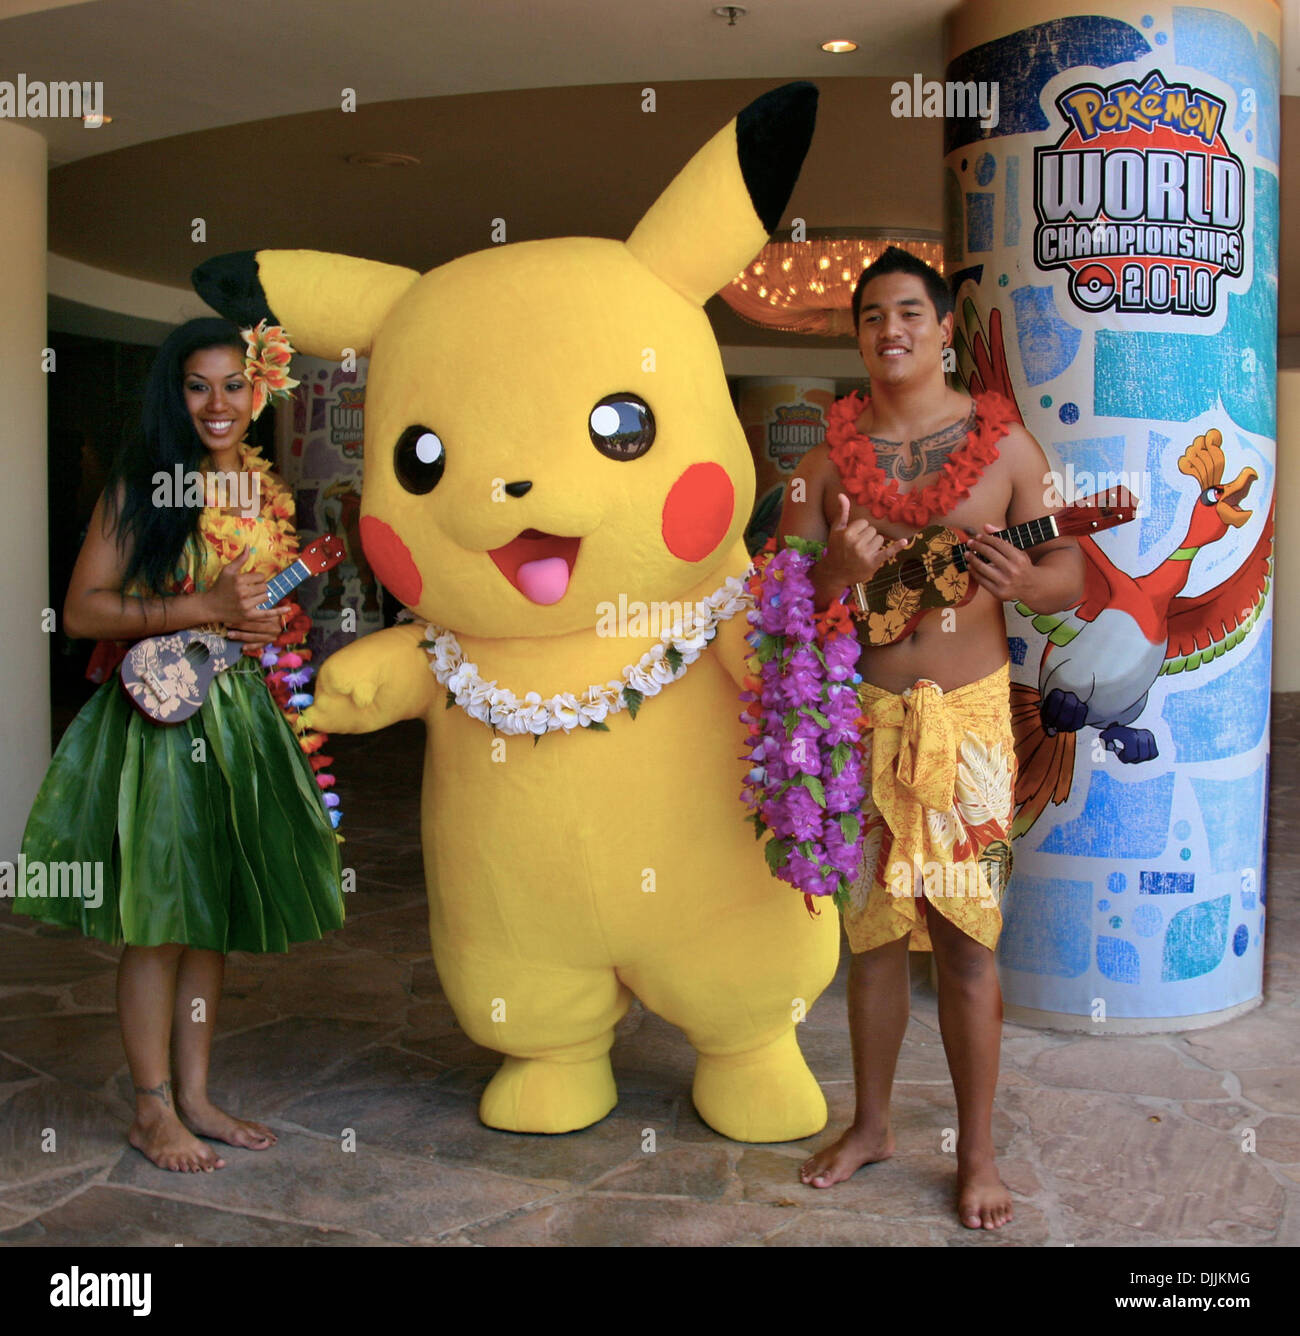 Aug 14, 2010 - Big Island, Hawaii, U.S. - PokŽmon Trading Card Game and video game players from over 25 countries have received a warm Hawaiian welcome during this weekend's 2010 PokŽmon World Championships held in Waikoloa, HI.  In attendance is PokŽmon's beloved character Pikachu to lend support to the hundreds of players on hand competing for the ultimate title of PokŽmon World  Stock Photo